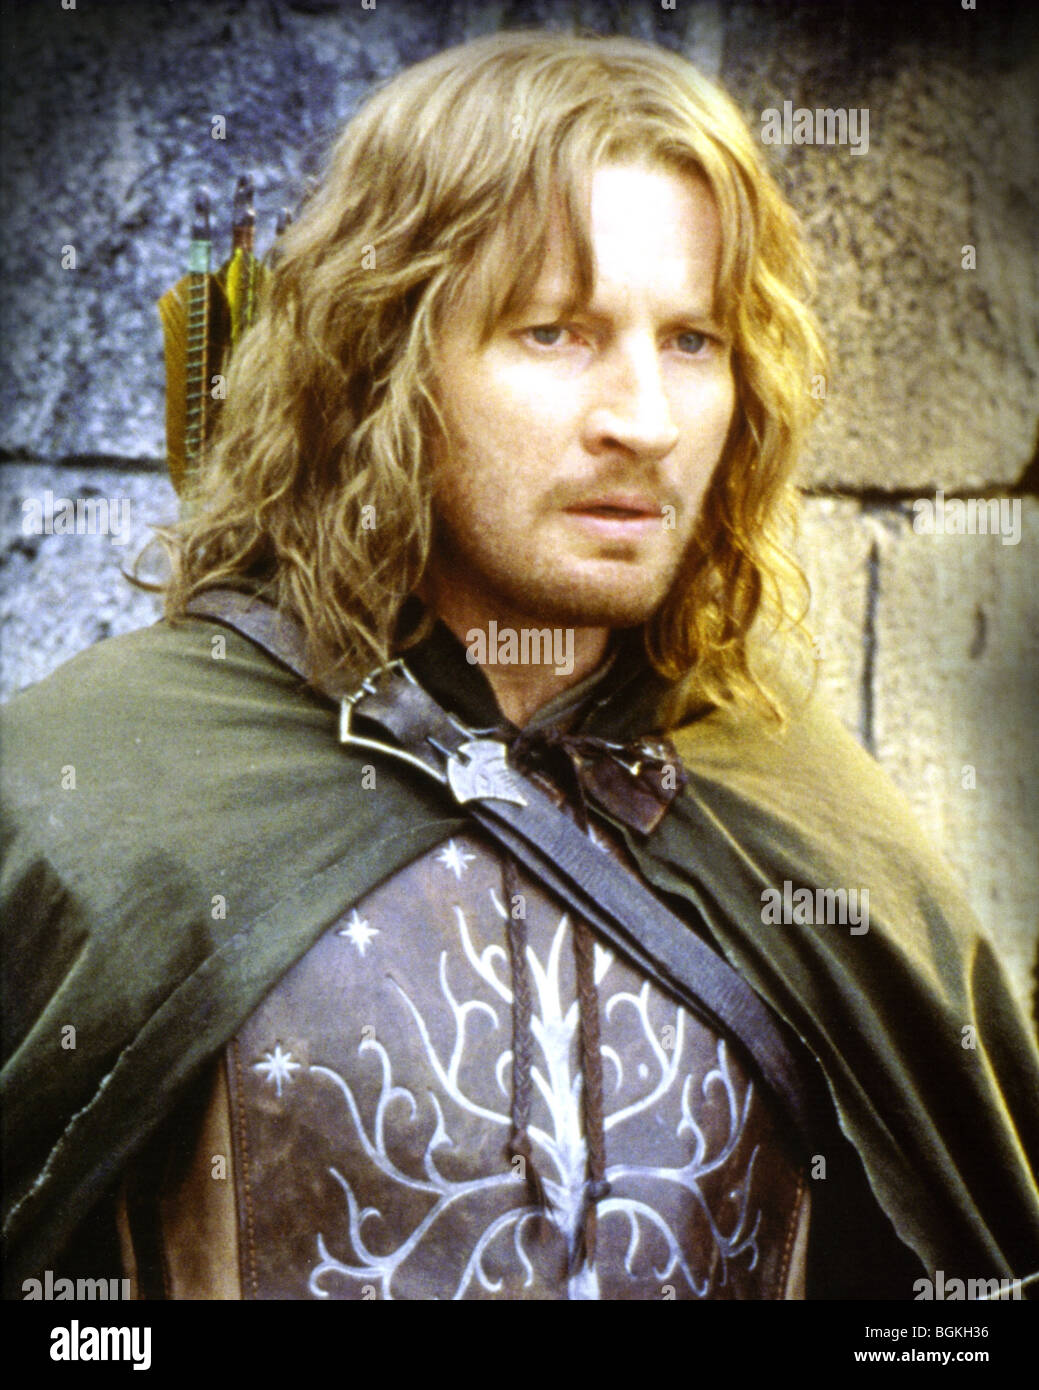 LORD OF THE RINGS: THE RETURN OF THE KING - 2003 Entertainment/New Line film with David Wenham as Faramir Stock Photo